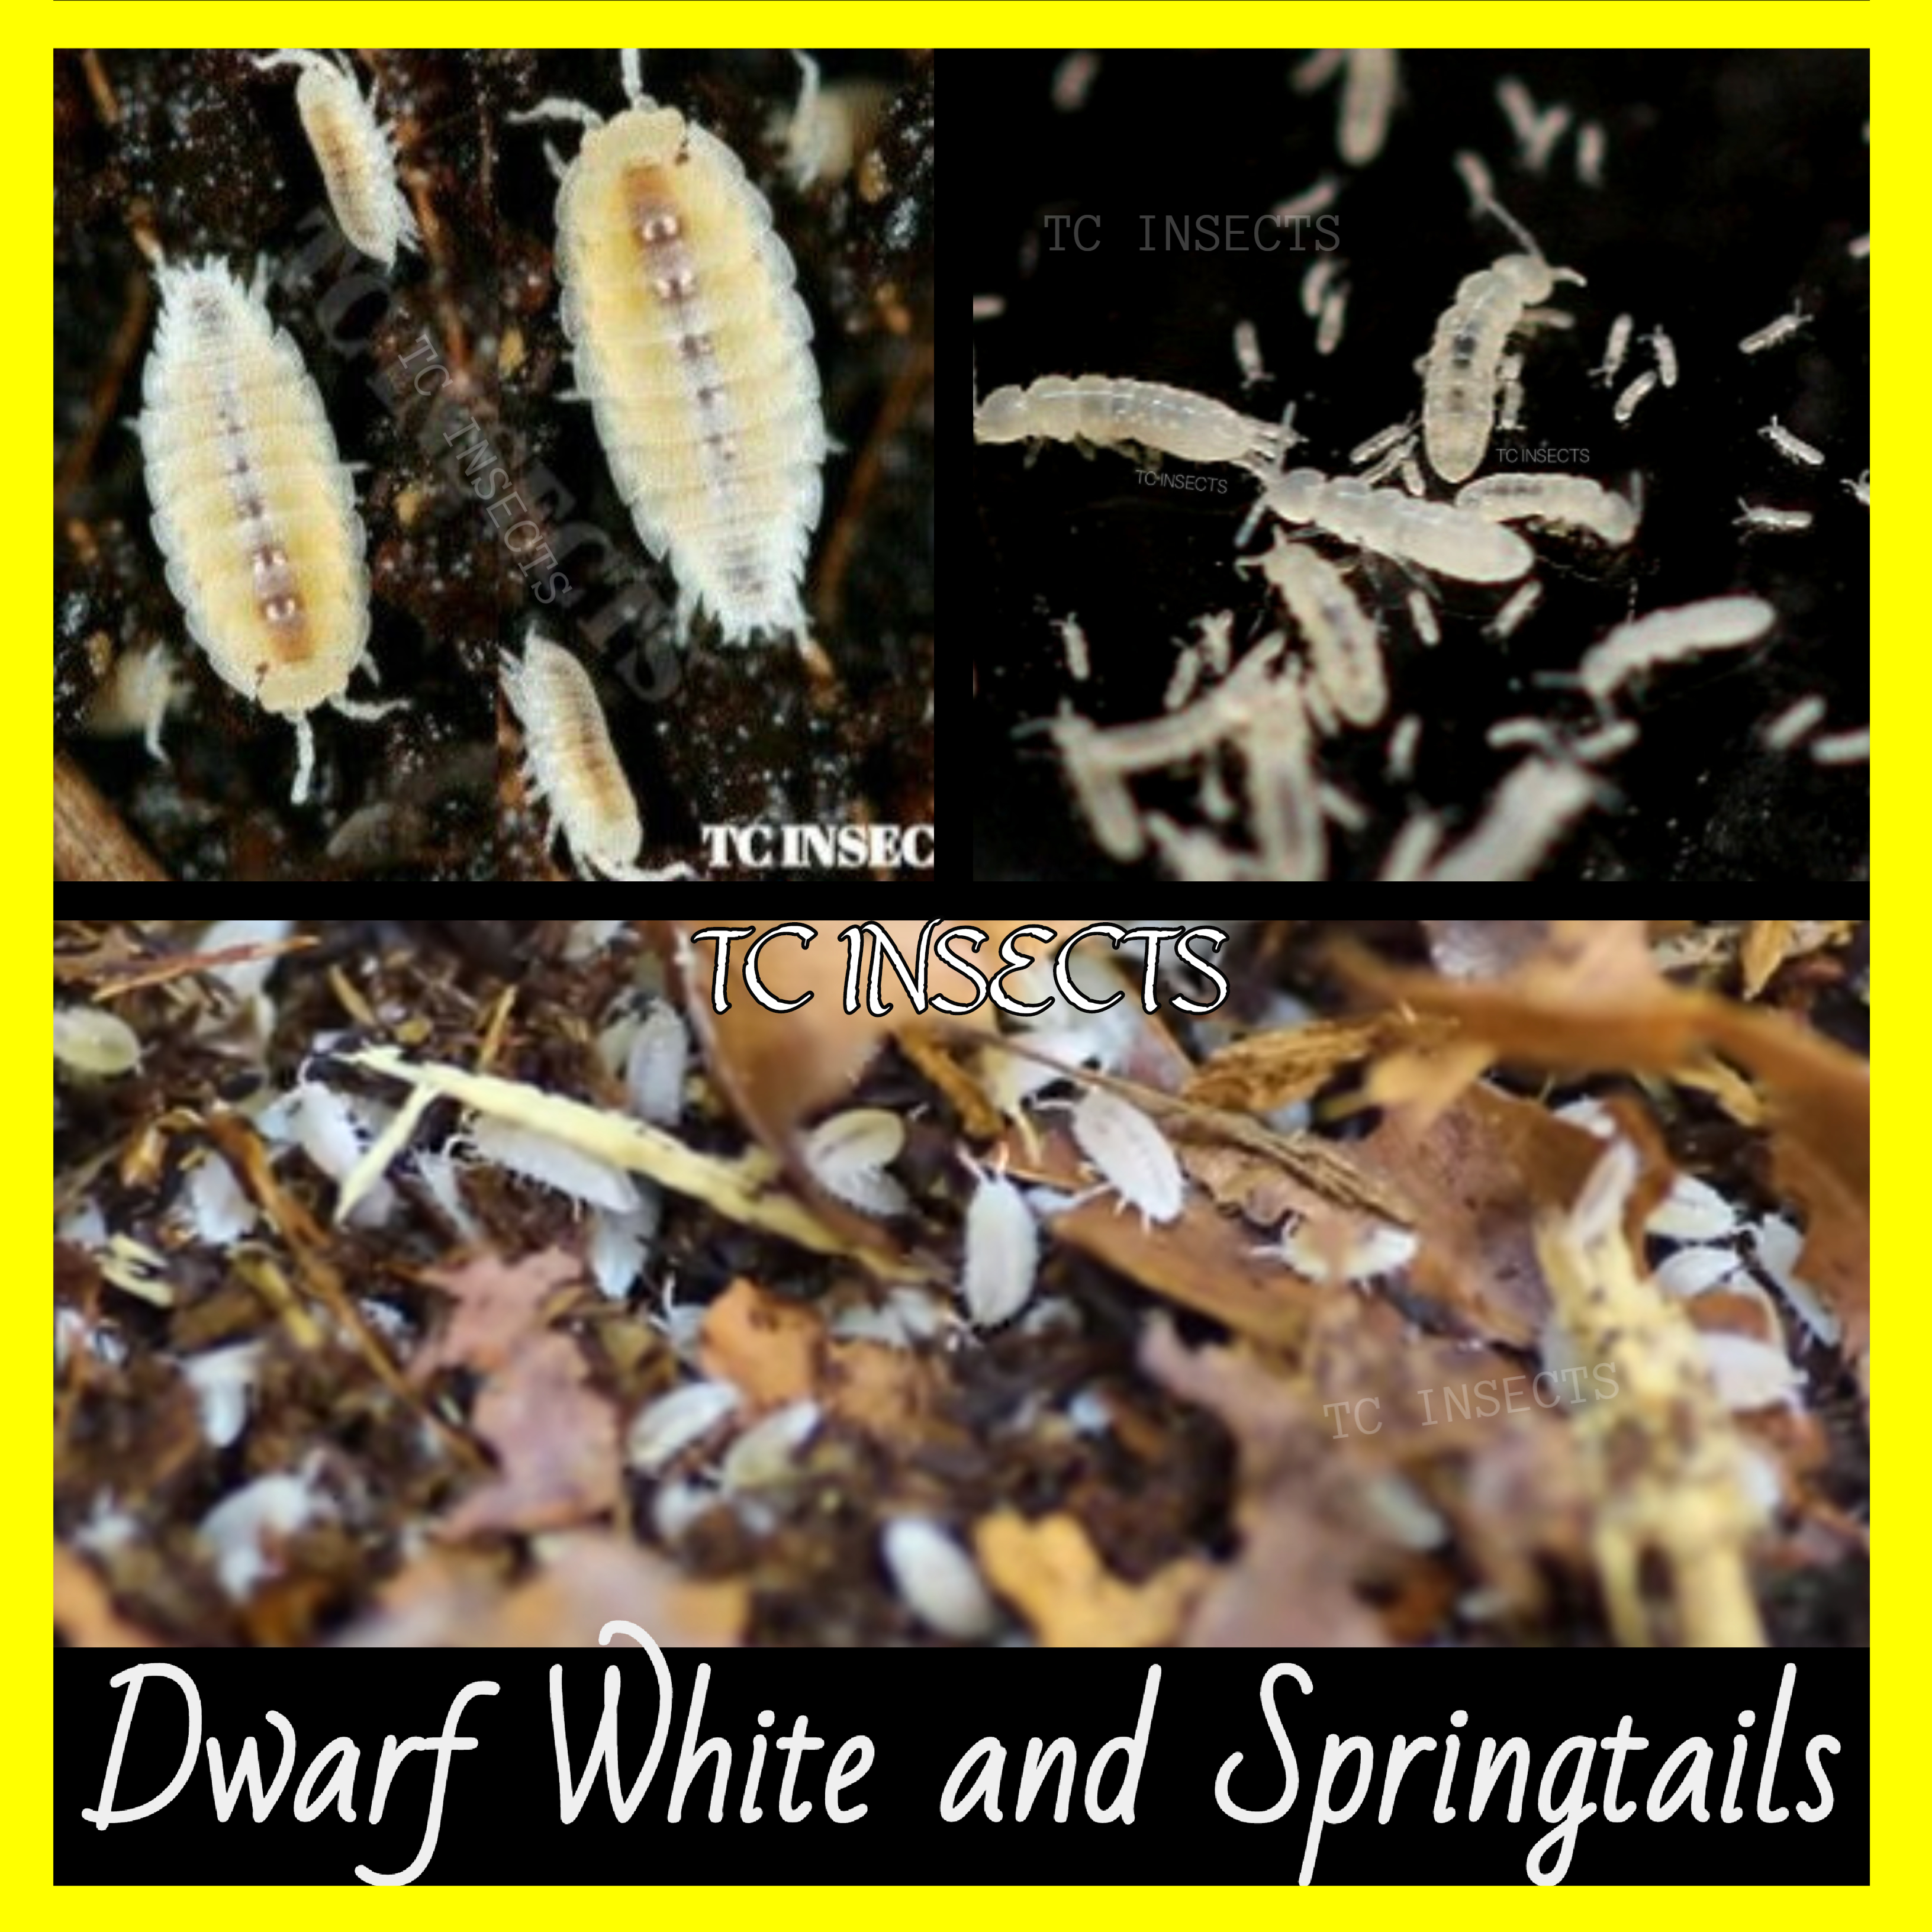 20 Dwarf White Isopods & 8oz Springtail Culture - TC INSECTS